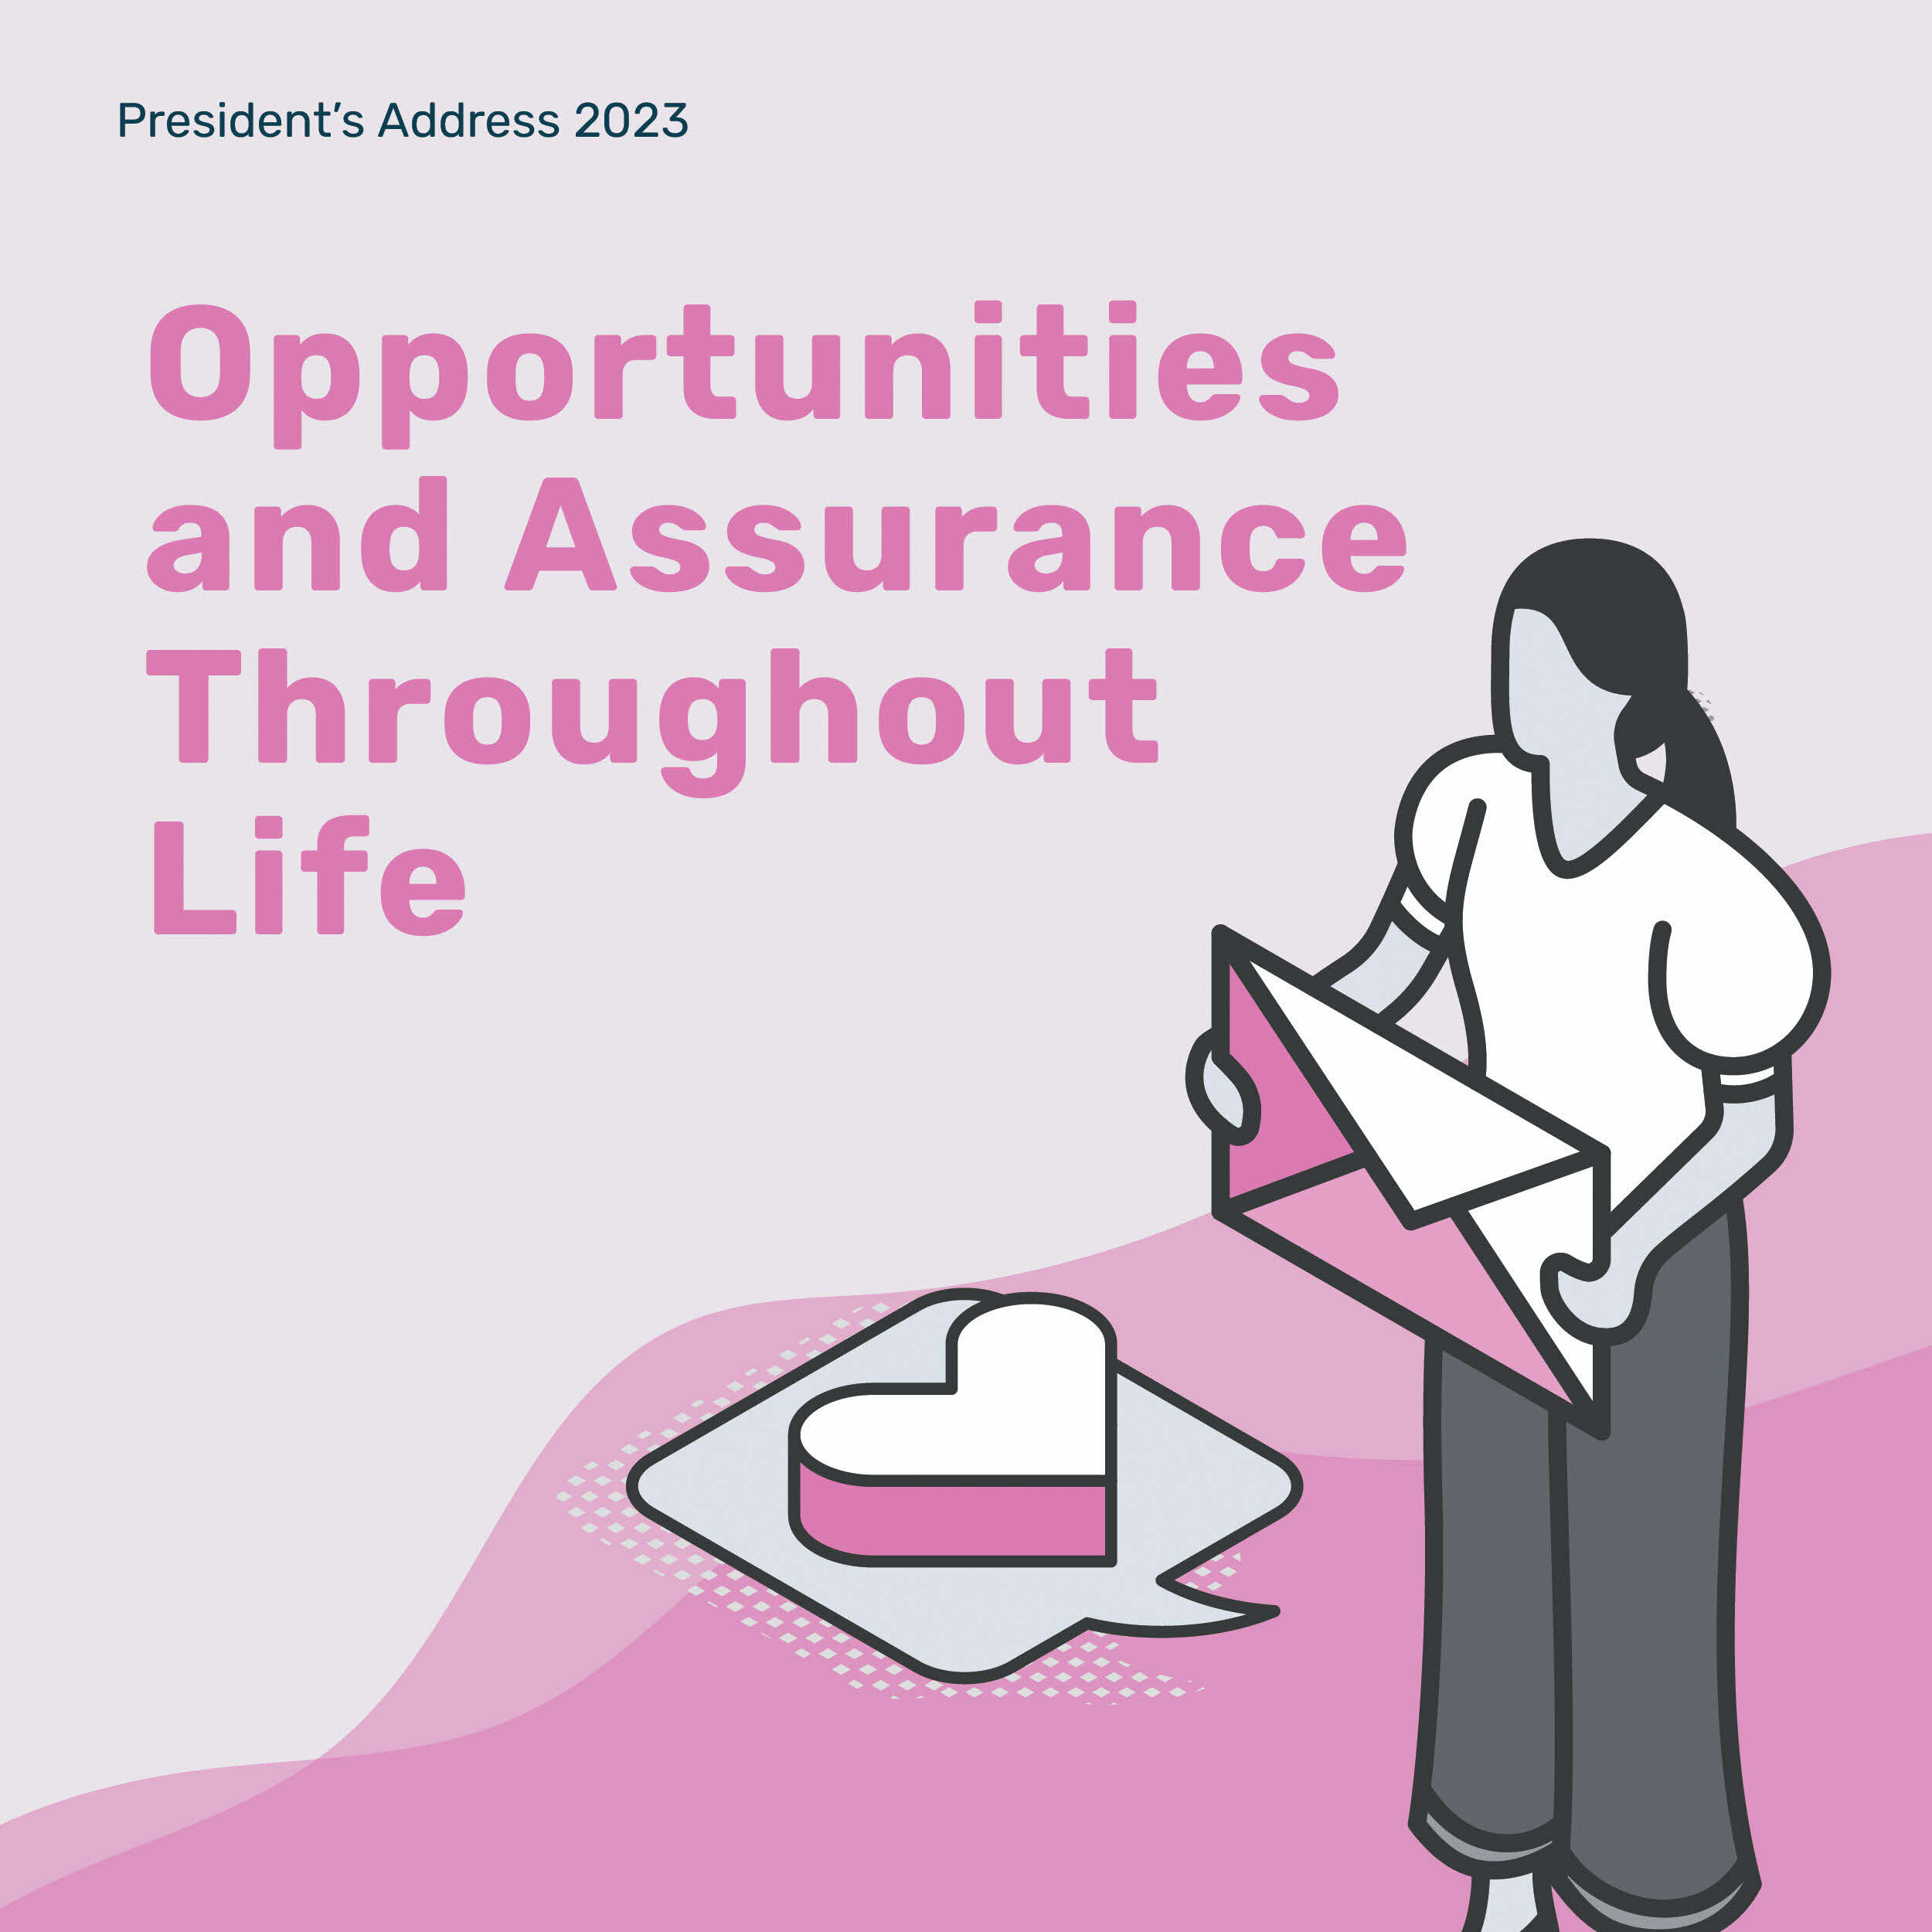 Opportunities and Assurance Throughout Life